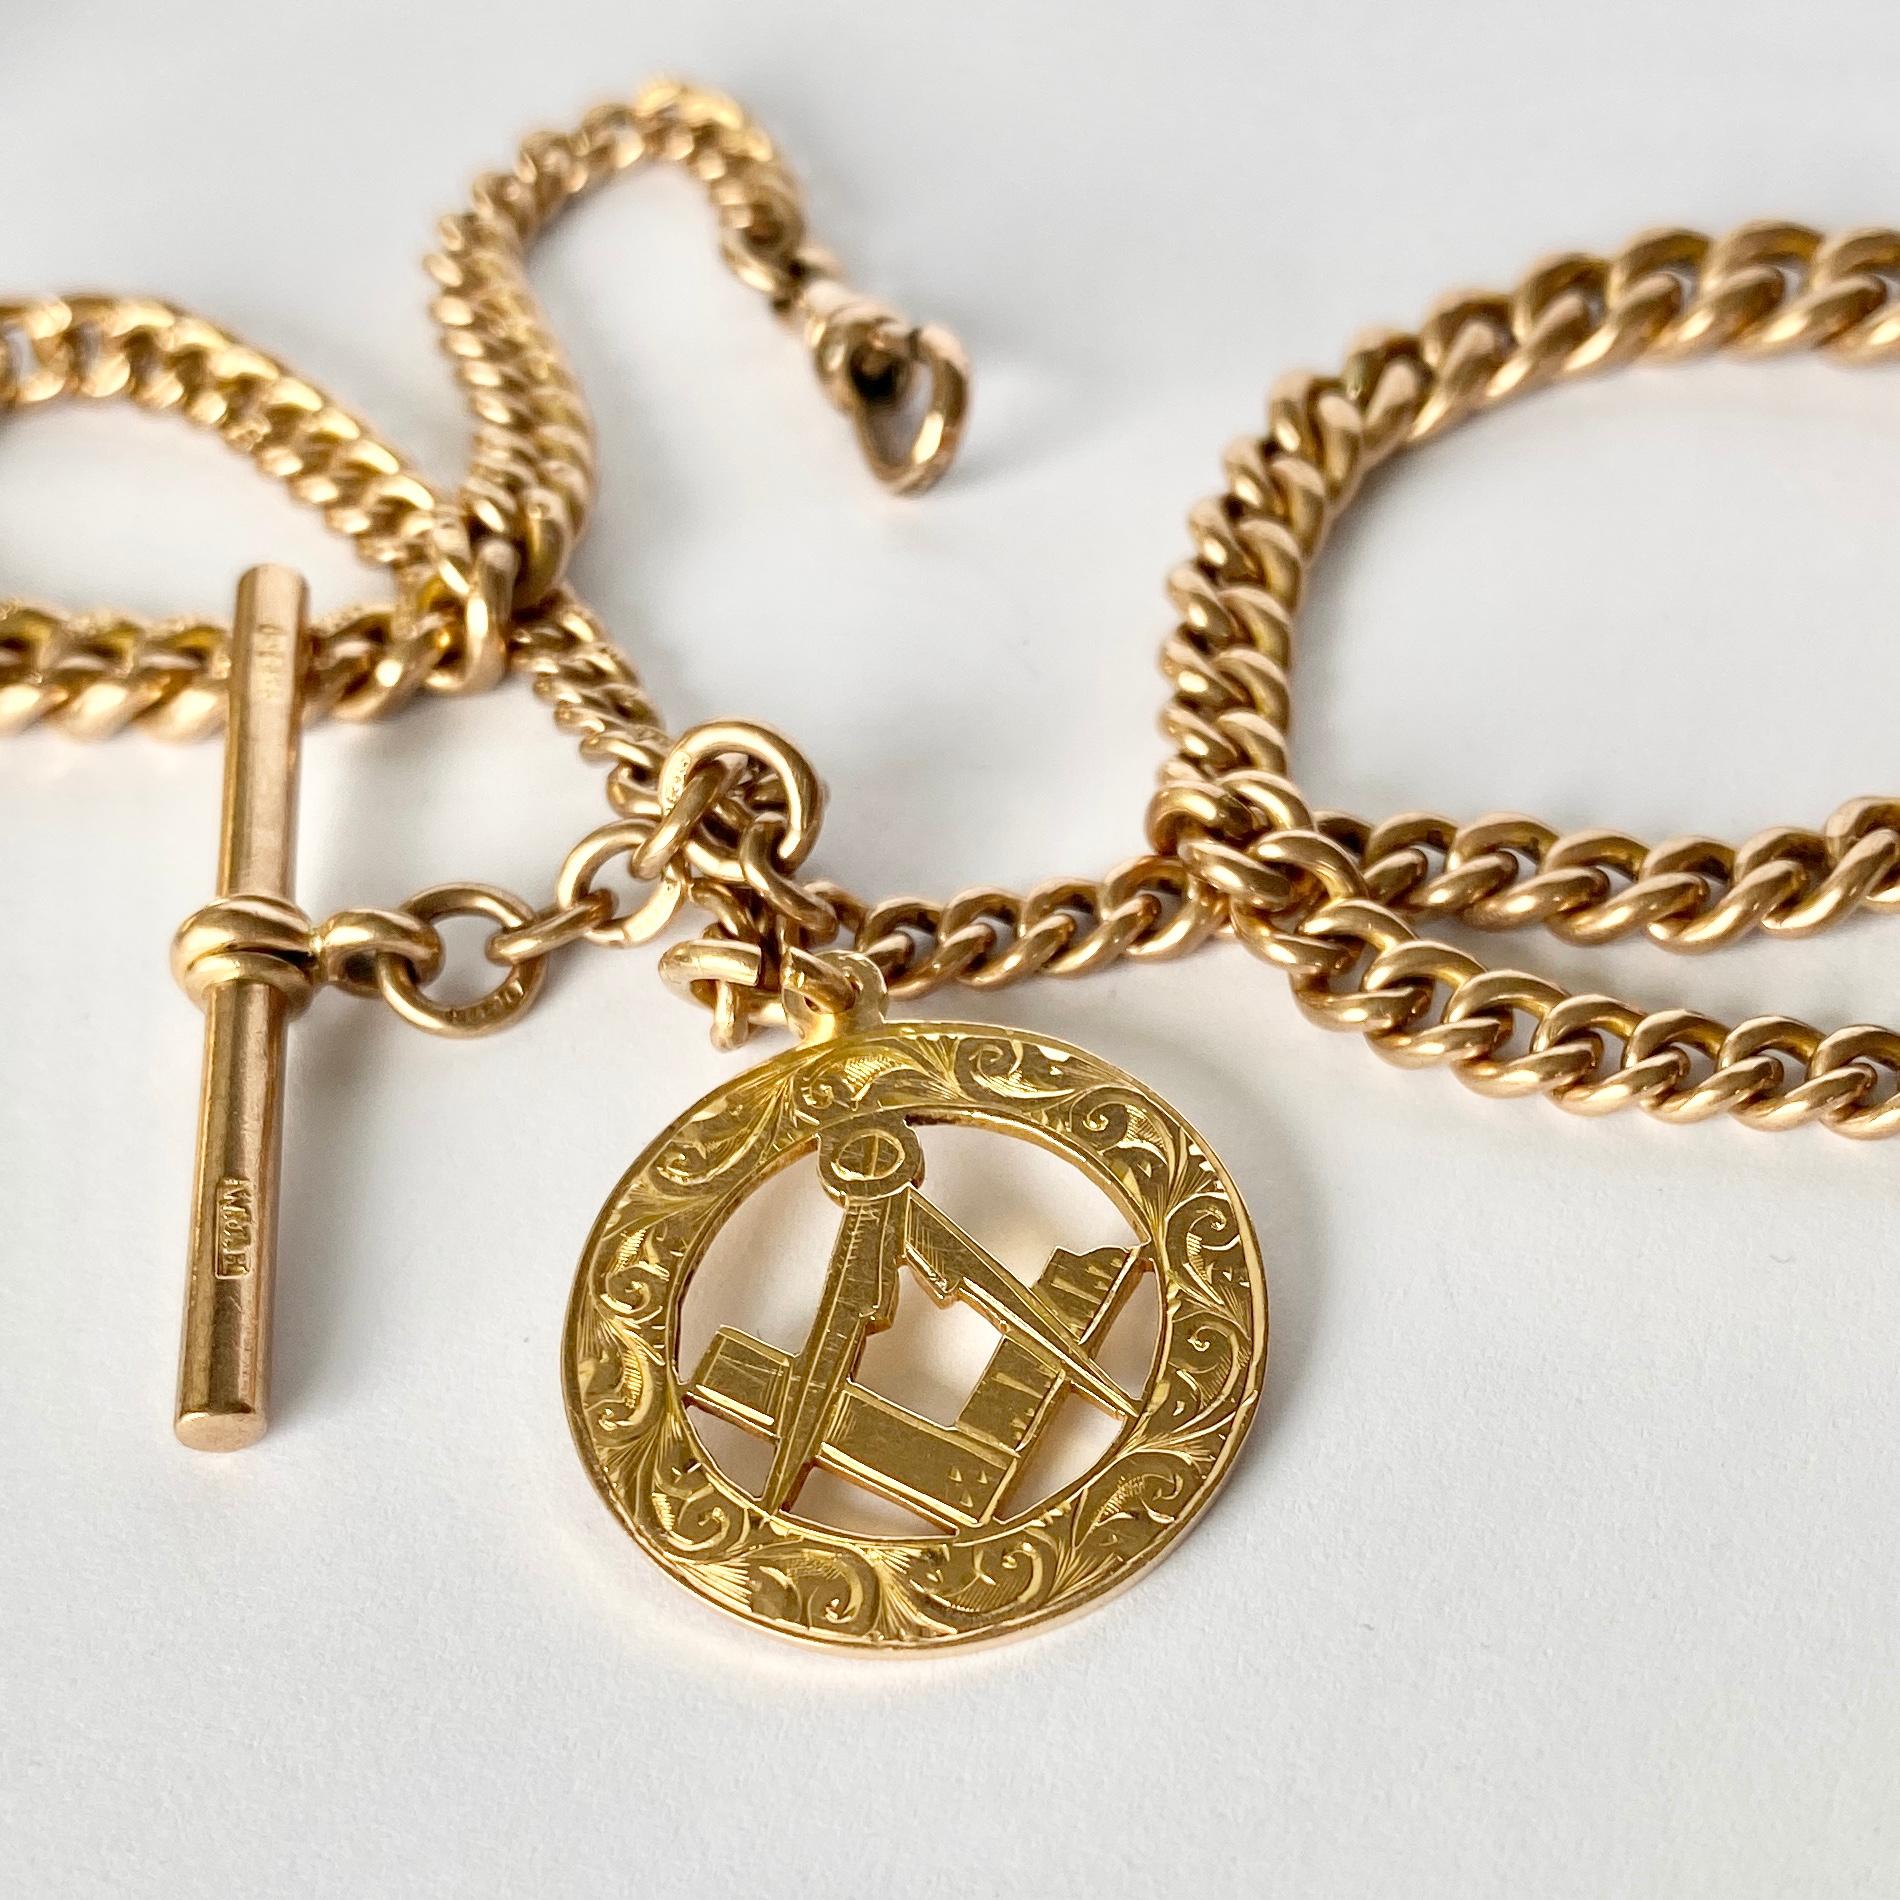 This 9carat gold albert chain is the perfect addition to any gents wardrobe or can be worn as a necklace and has a dog clip on both ends. The chain also holds a masonic pendant and a t-bar.

Length: 39cm
Link Width: 4-6mm

Weight: 41.4g 